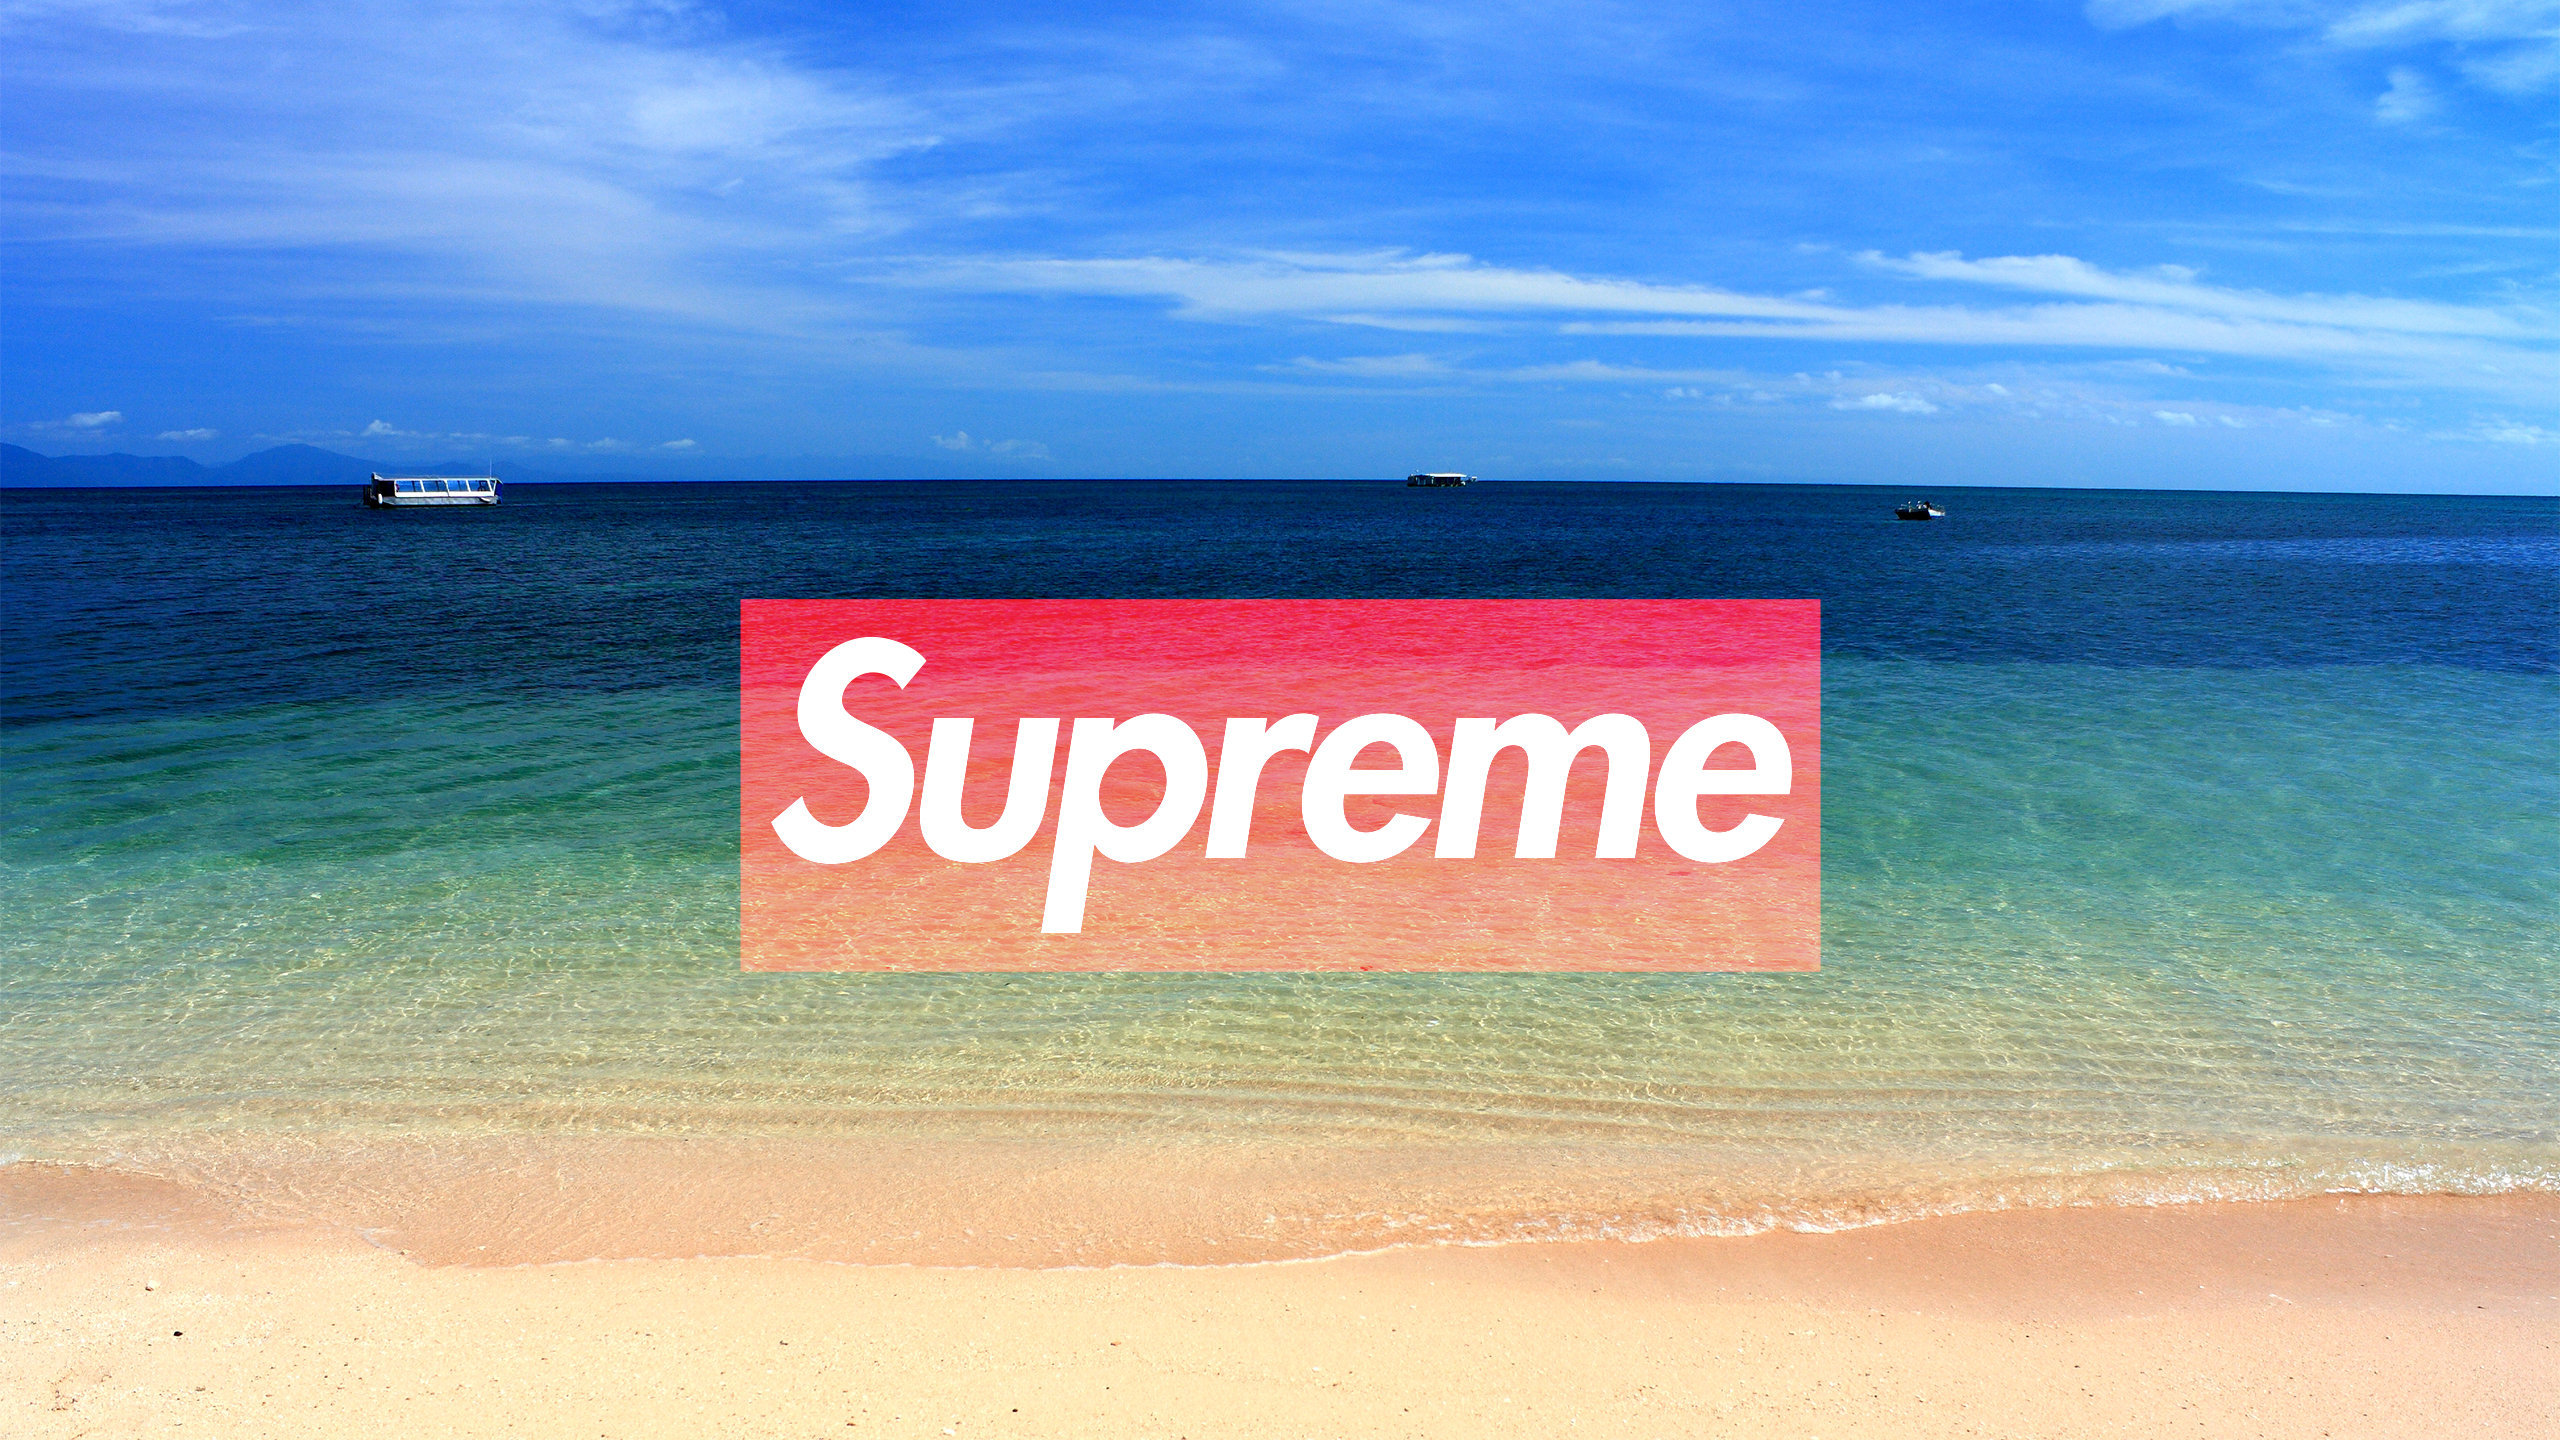 Supreme Full Hd Wallpapers Free Download For Desktop - Supreme Cool Wallpapers Hd - HD Wallpaper 